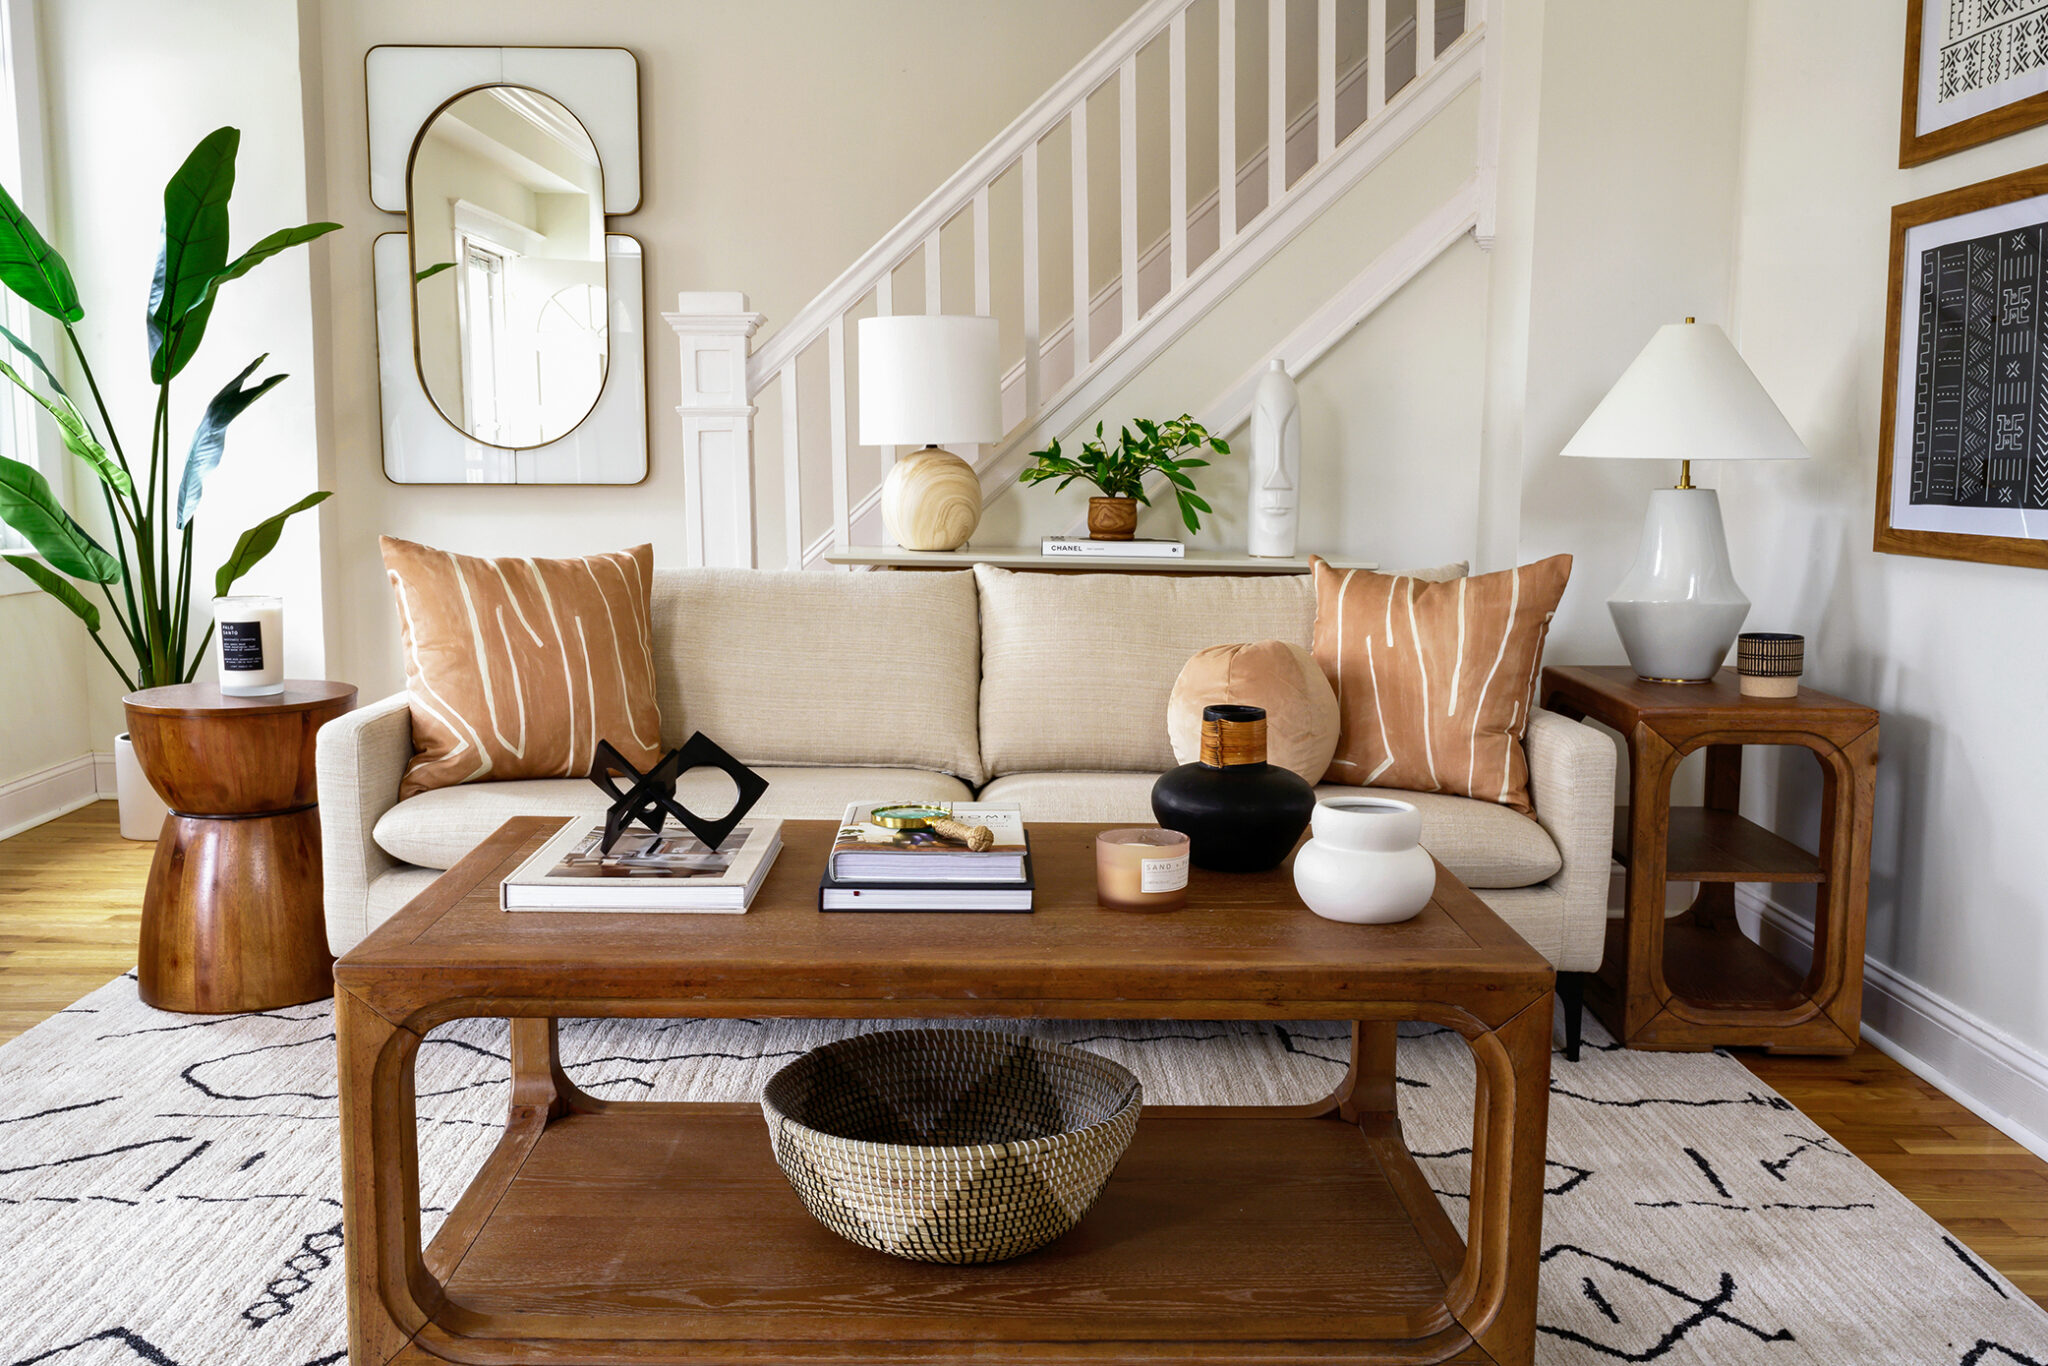 Top 5 Living Room Makeover Styles - Decorating Den Interiors